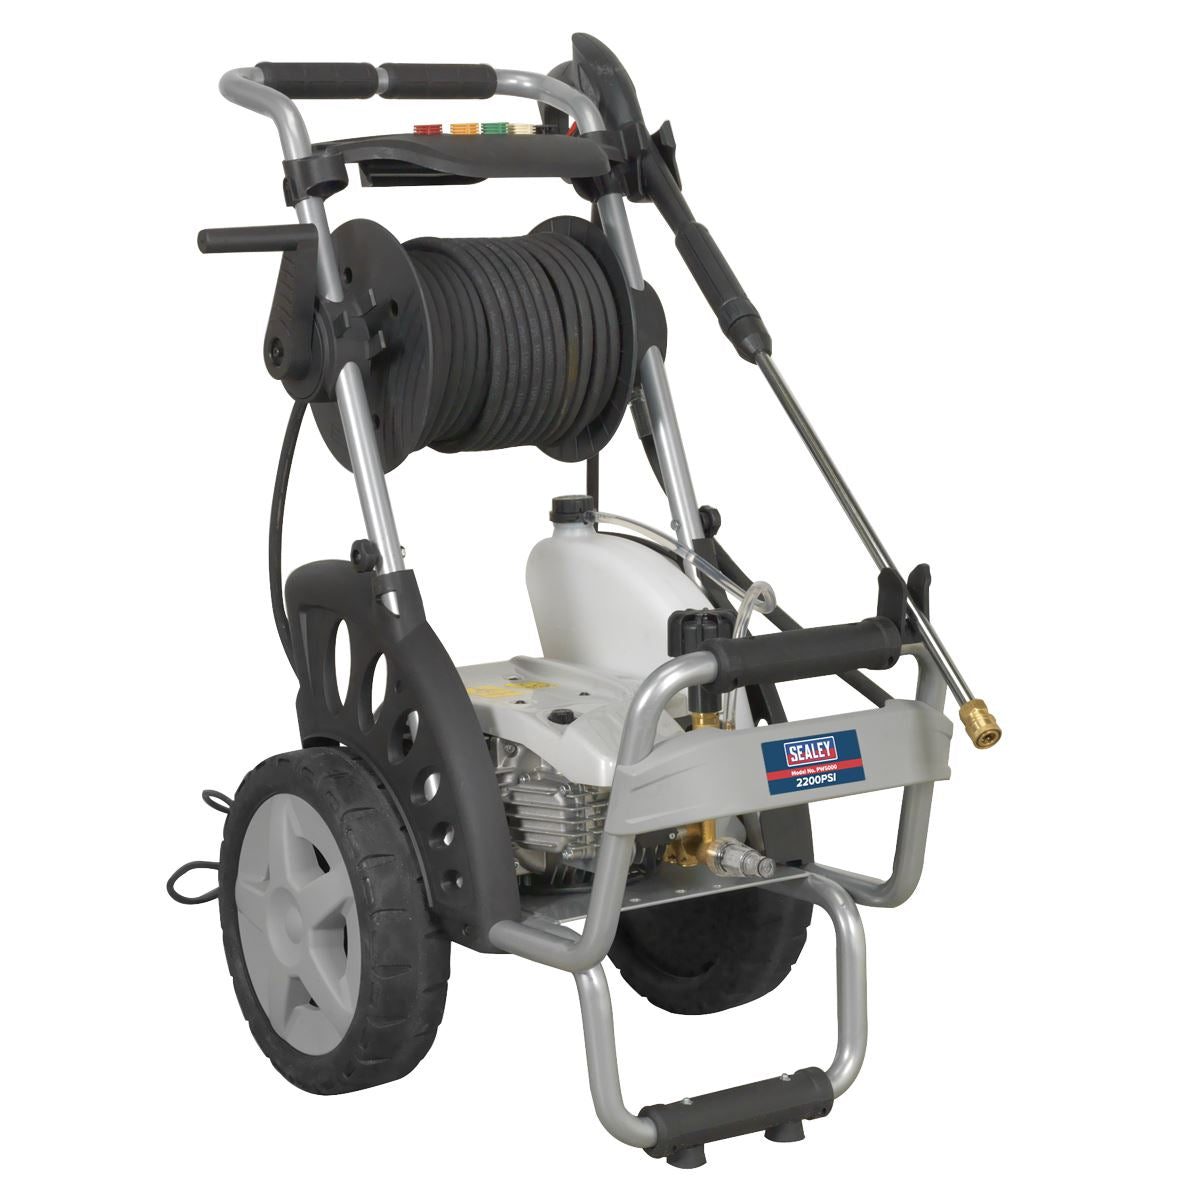 Sealey Professional Pressure Washer 150bar with Accessories